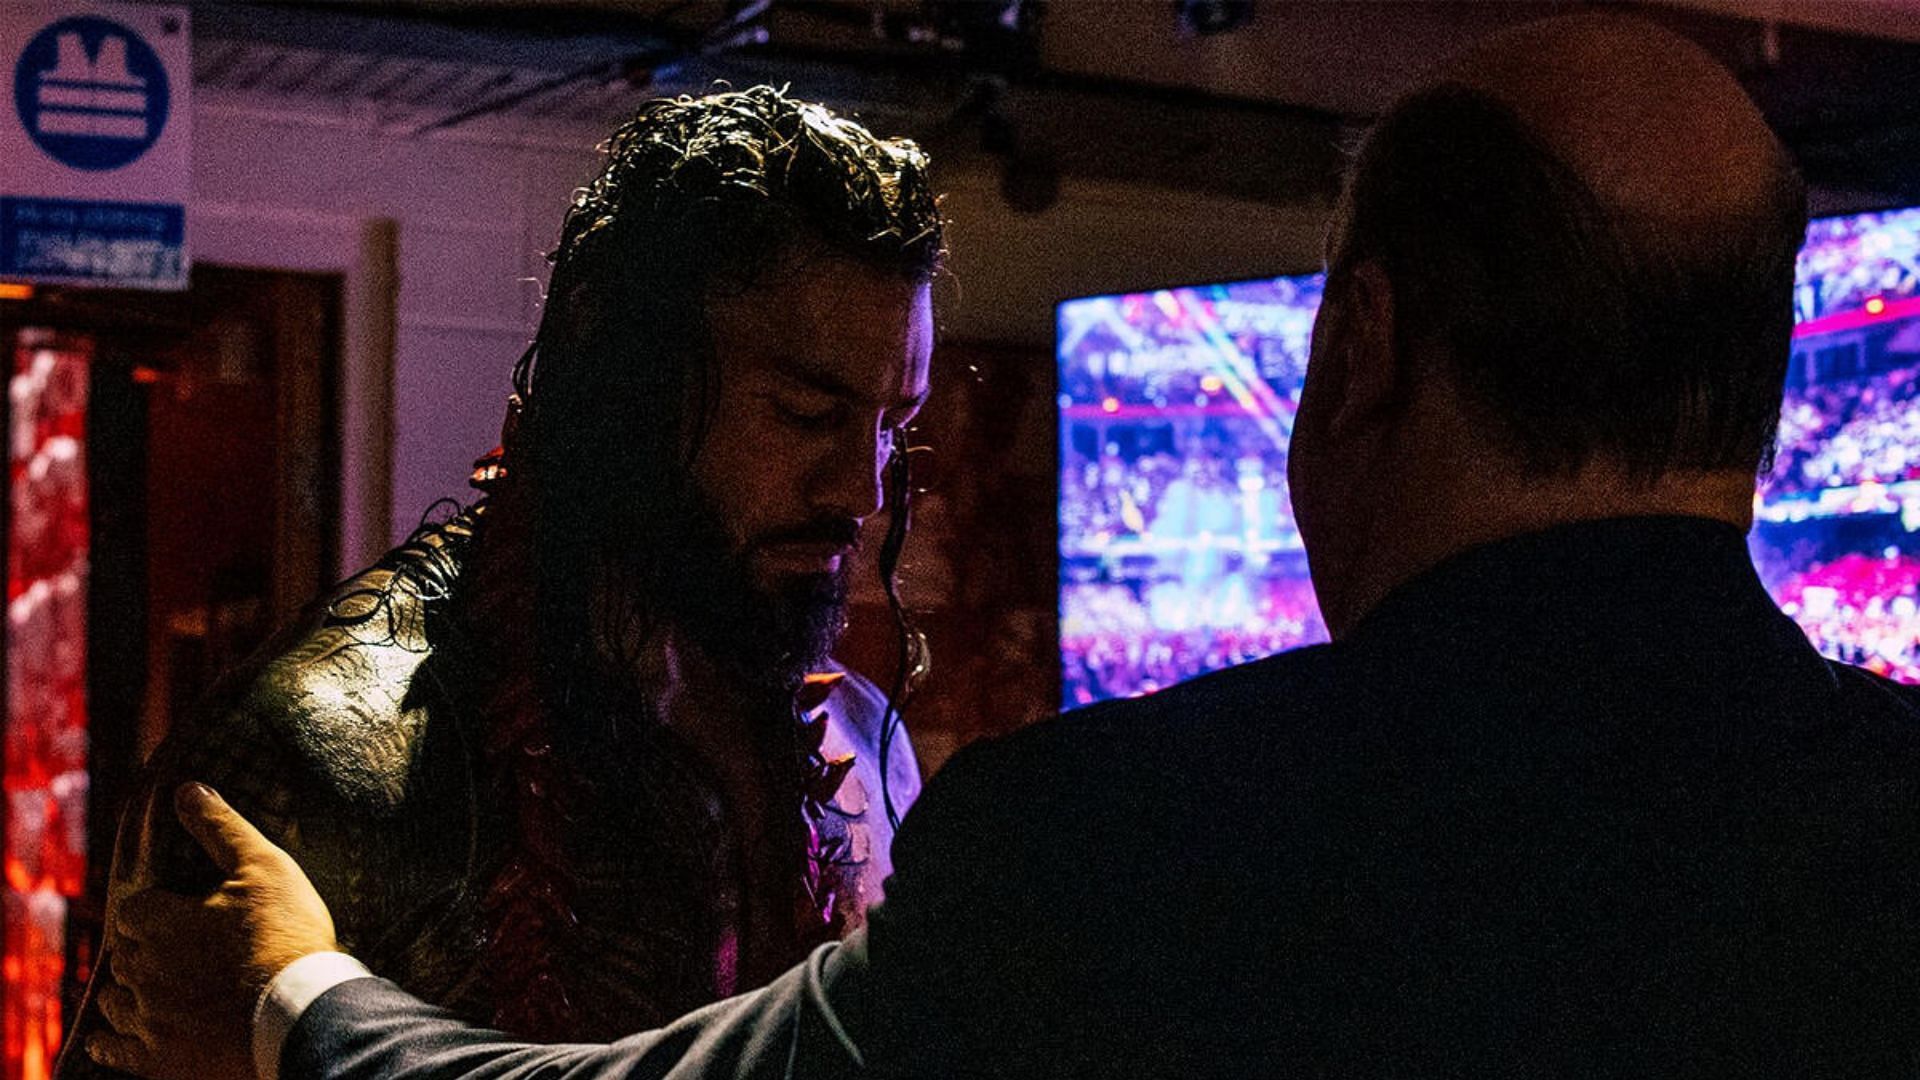 Roman Reigns and Paul Heyman are the founders of The Bloodline